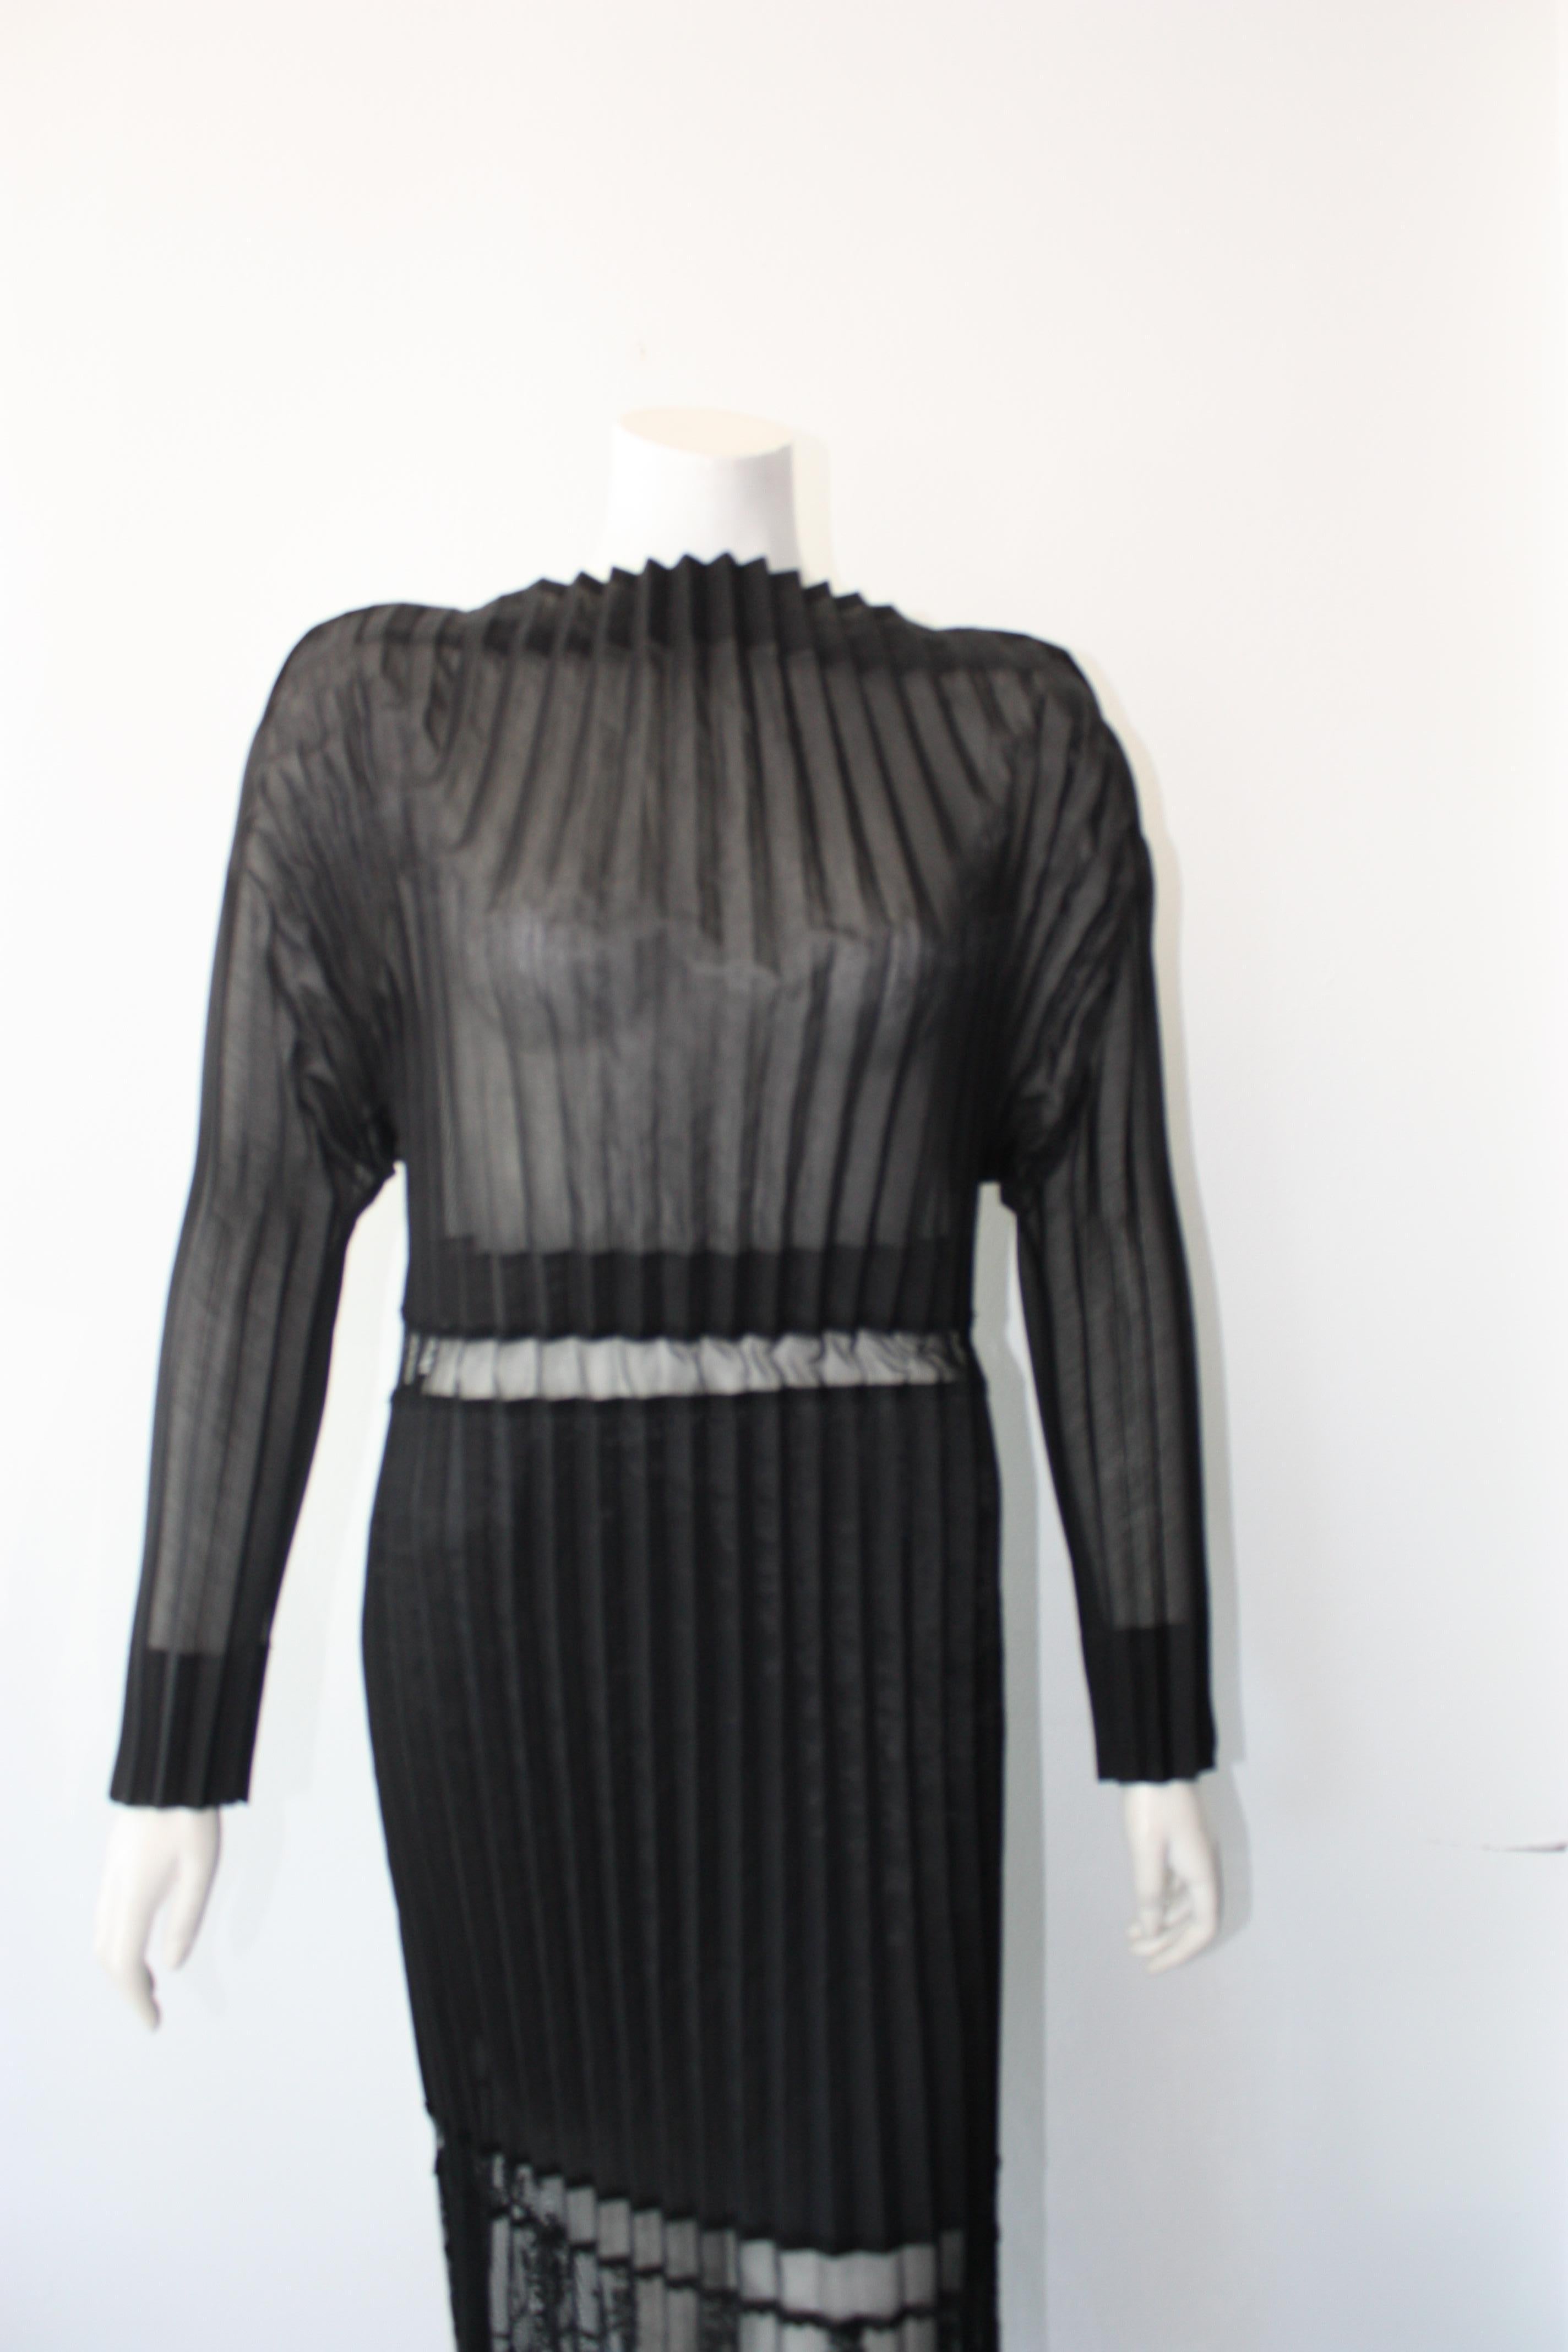 Stella McCartney Black Midi Sheer and Pleated Lace Dress Size 42 For Sale 3